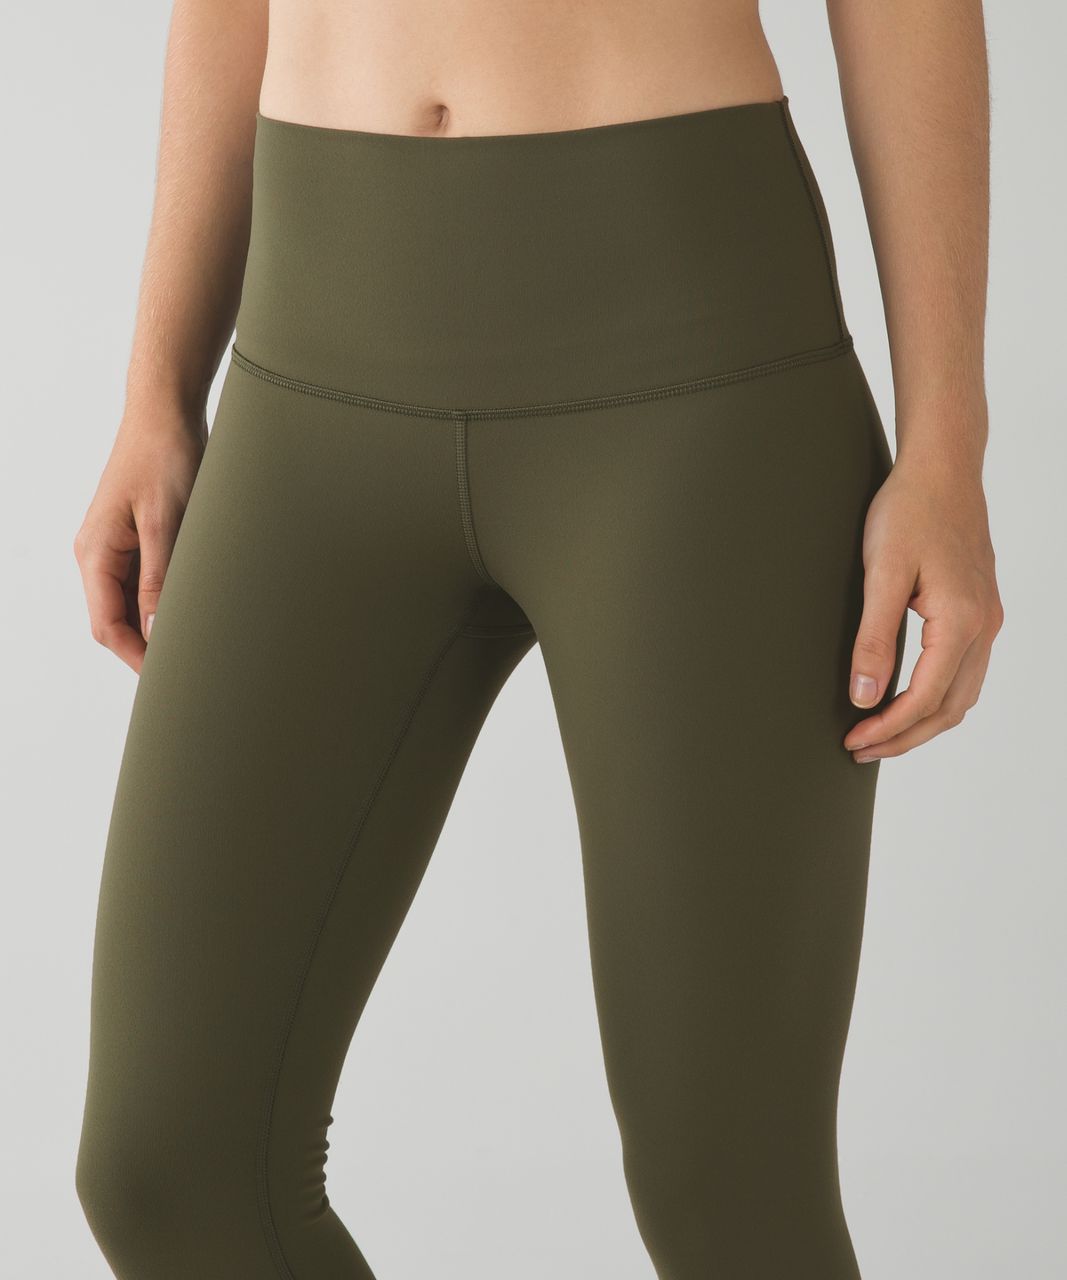 Lululemon Wunder Under Pant *Full-On Luon (Roll Down) - Fatigue Green